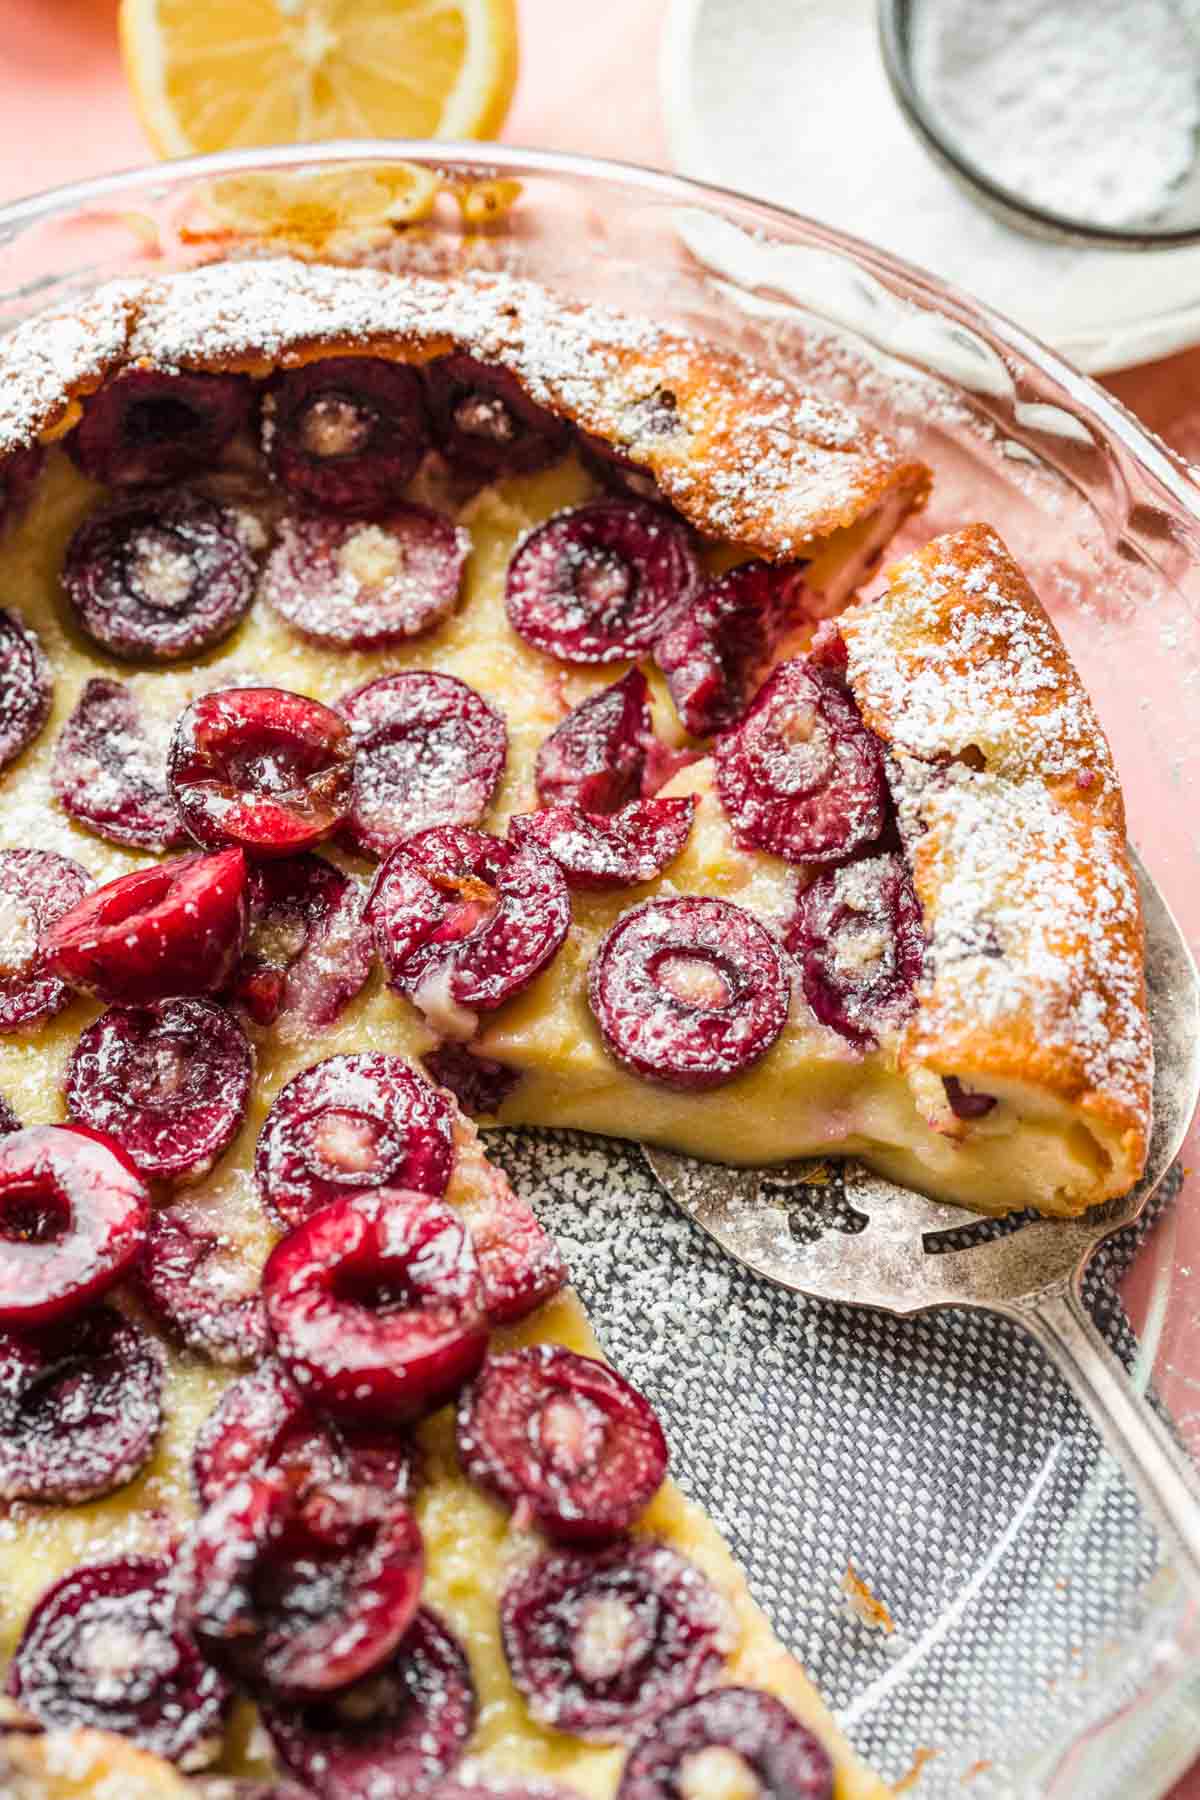 Cherry Clafoutis baked in dish with slice removed and serving spatula under another slice, with pink background and ingredient decorations